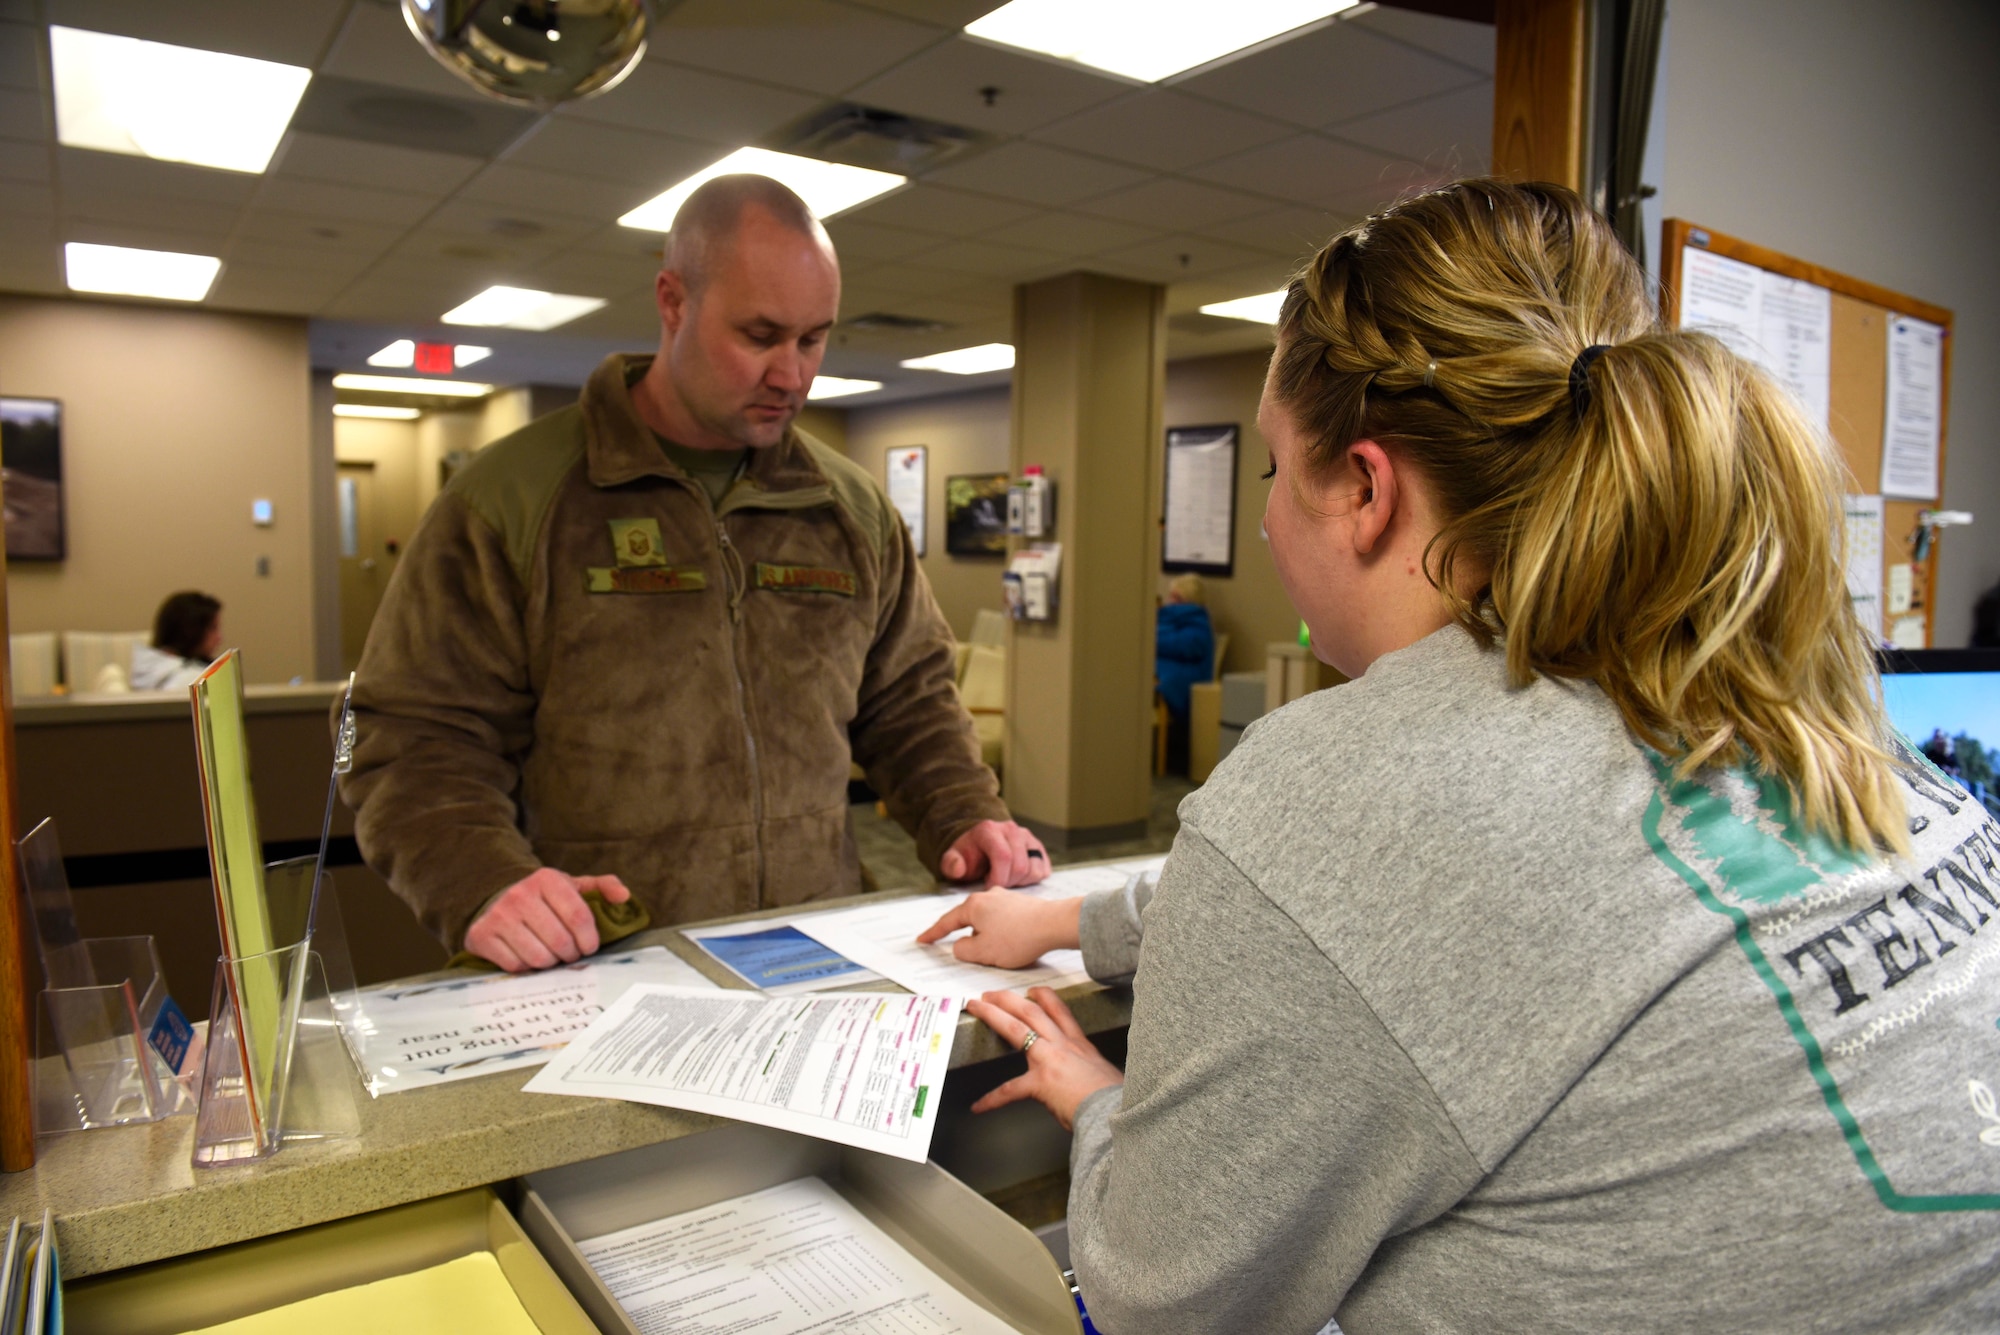 Taylor Kobylinski, 92nd Medical Operation Squadron medical administration assistant, assists an Airman with checking-in to the Family Health Center at Fairchild Air Force Base, Washington, Feb. 8, 2019. Data shows that initial fielding sites, like Fairchild, that document patient care in MHS Genesis continue to show increased operating capabilities in areas such as referrals processed, patients seen, prescriptions filled, and secure messaging. (U.S. Air Force photo/Airman 1st Class Lawrence Sena)